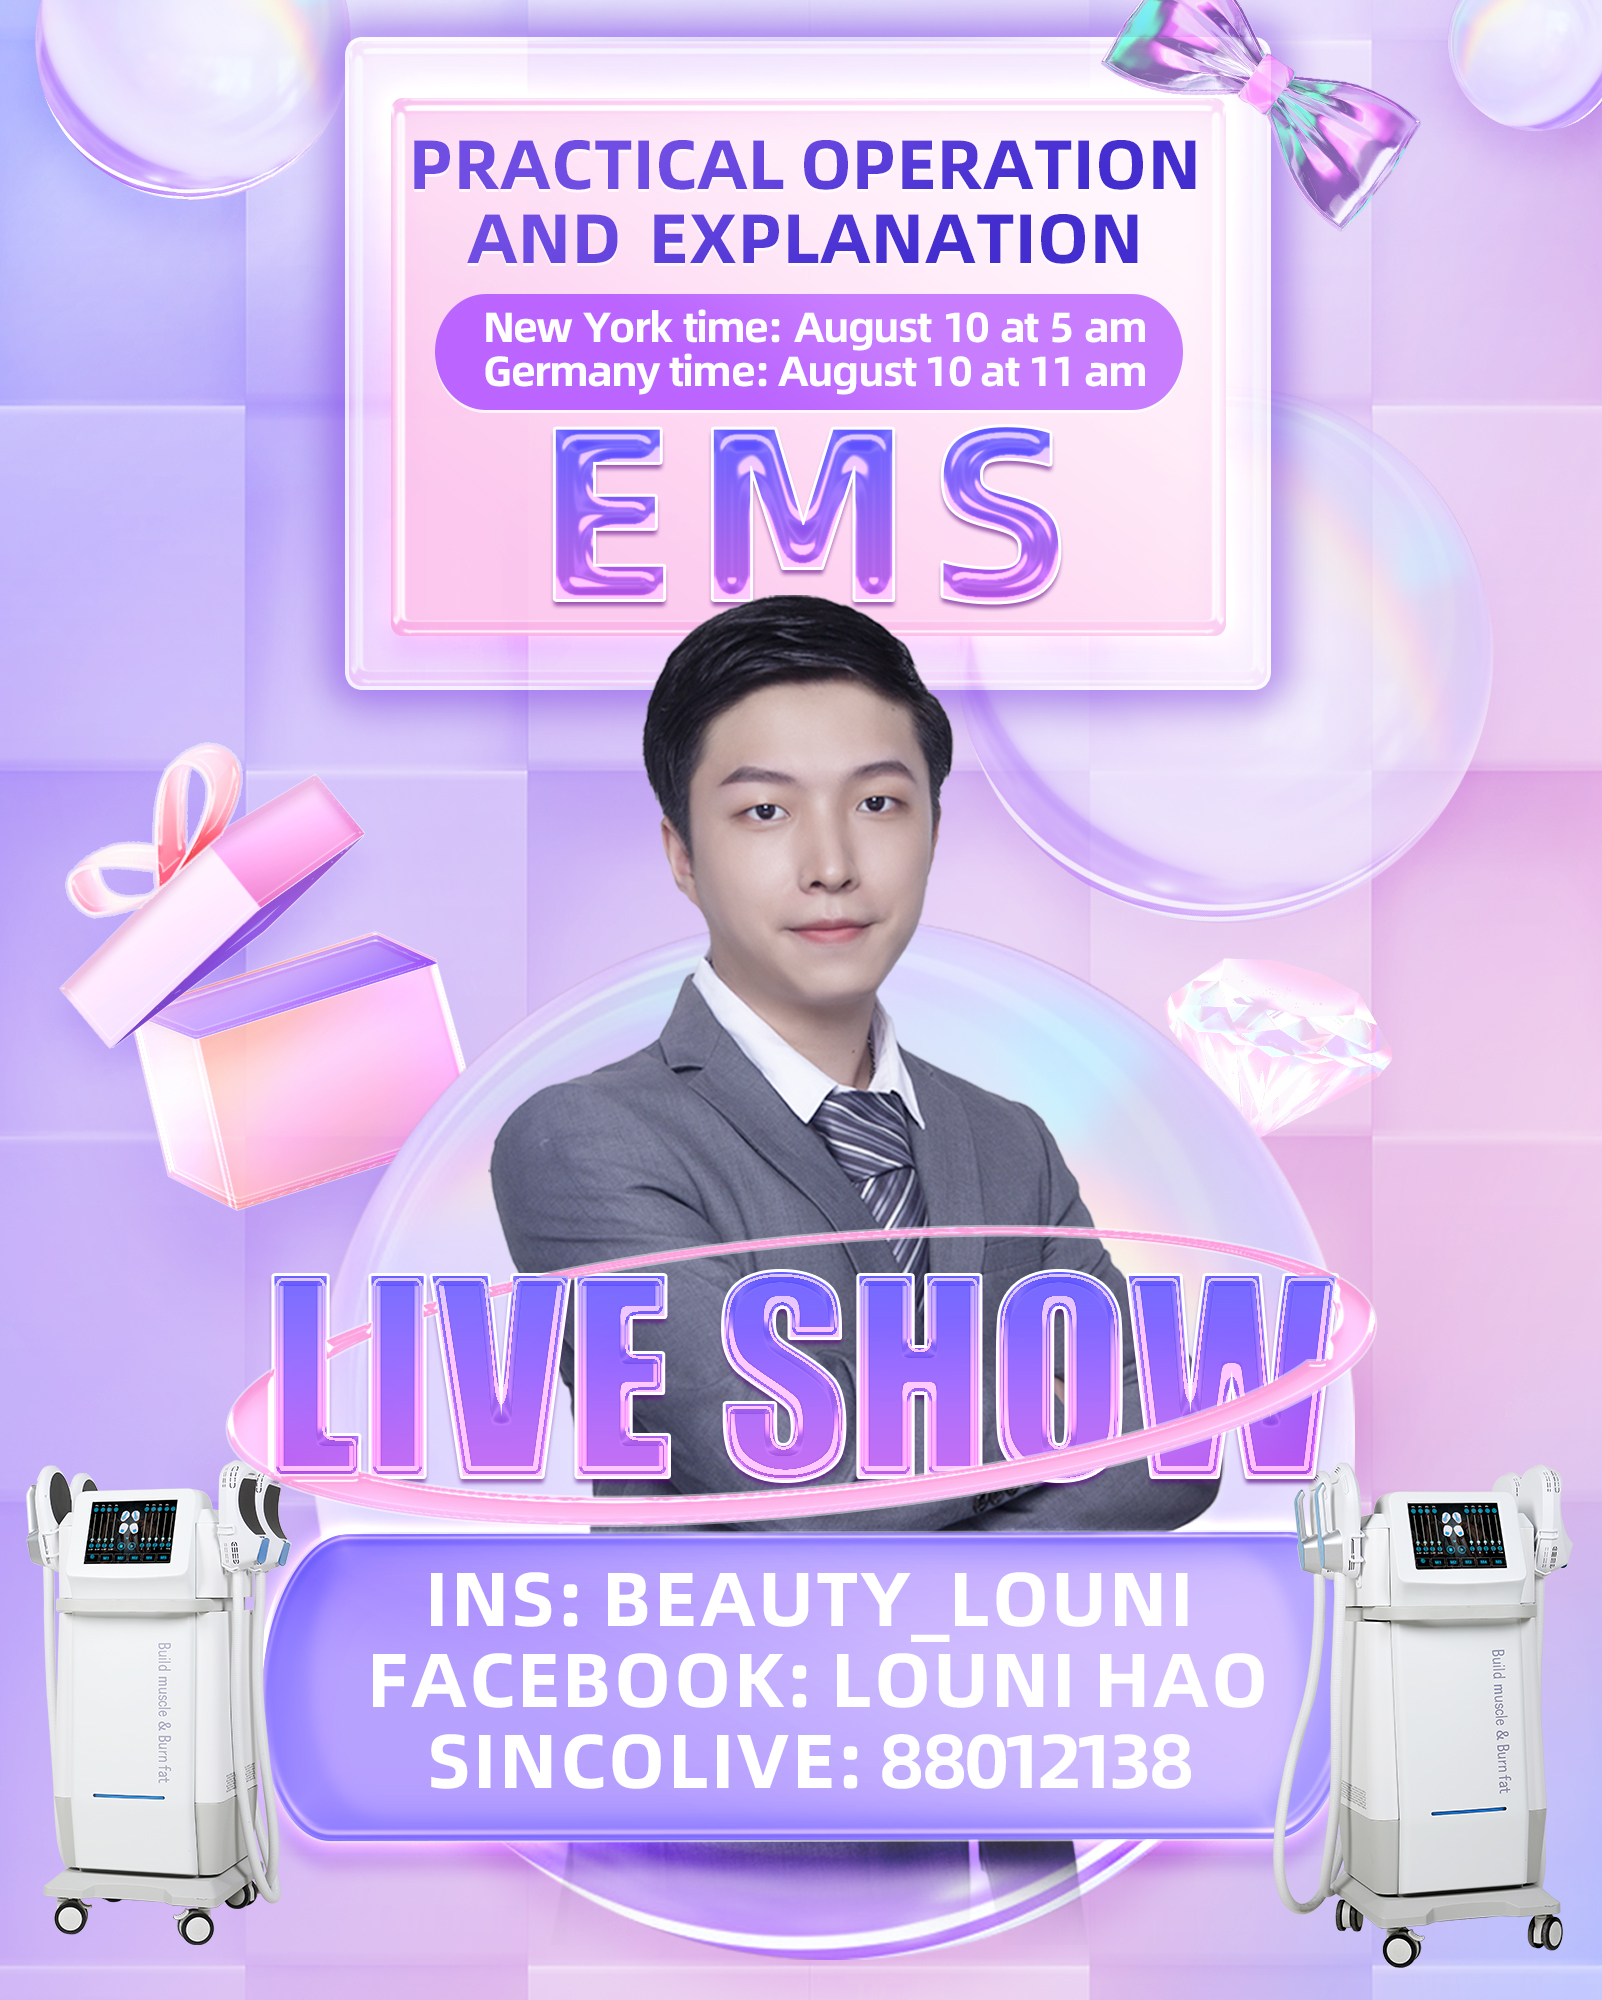 Live show–EMS Introduction and Operation